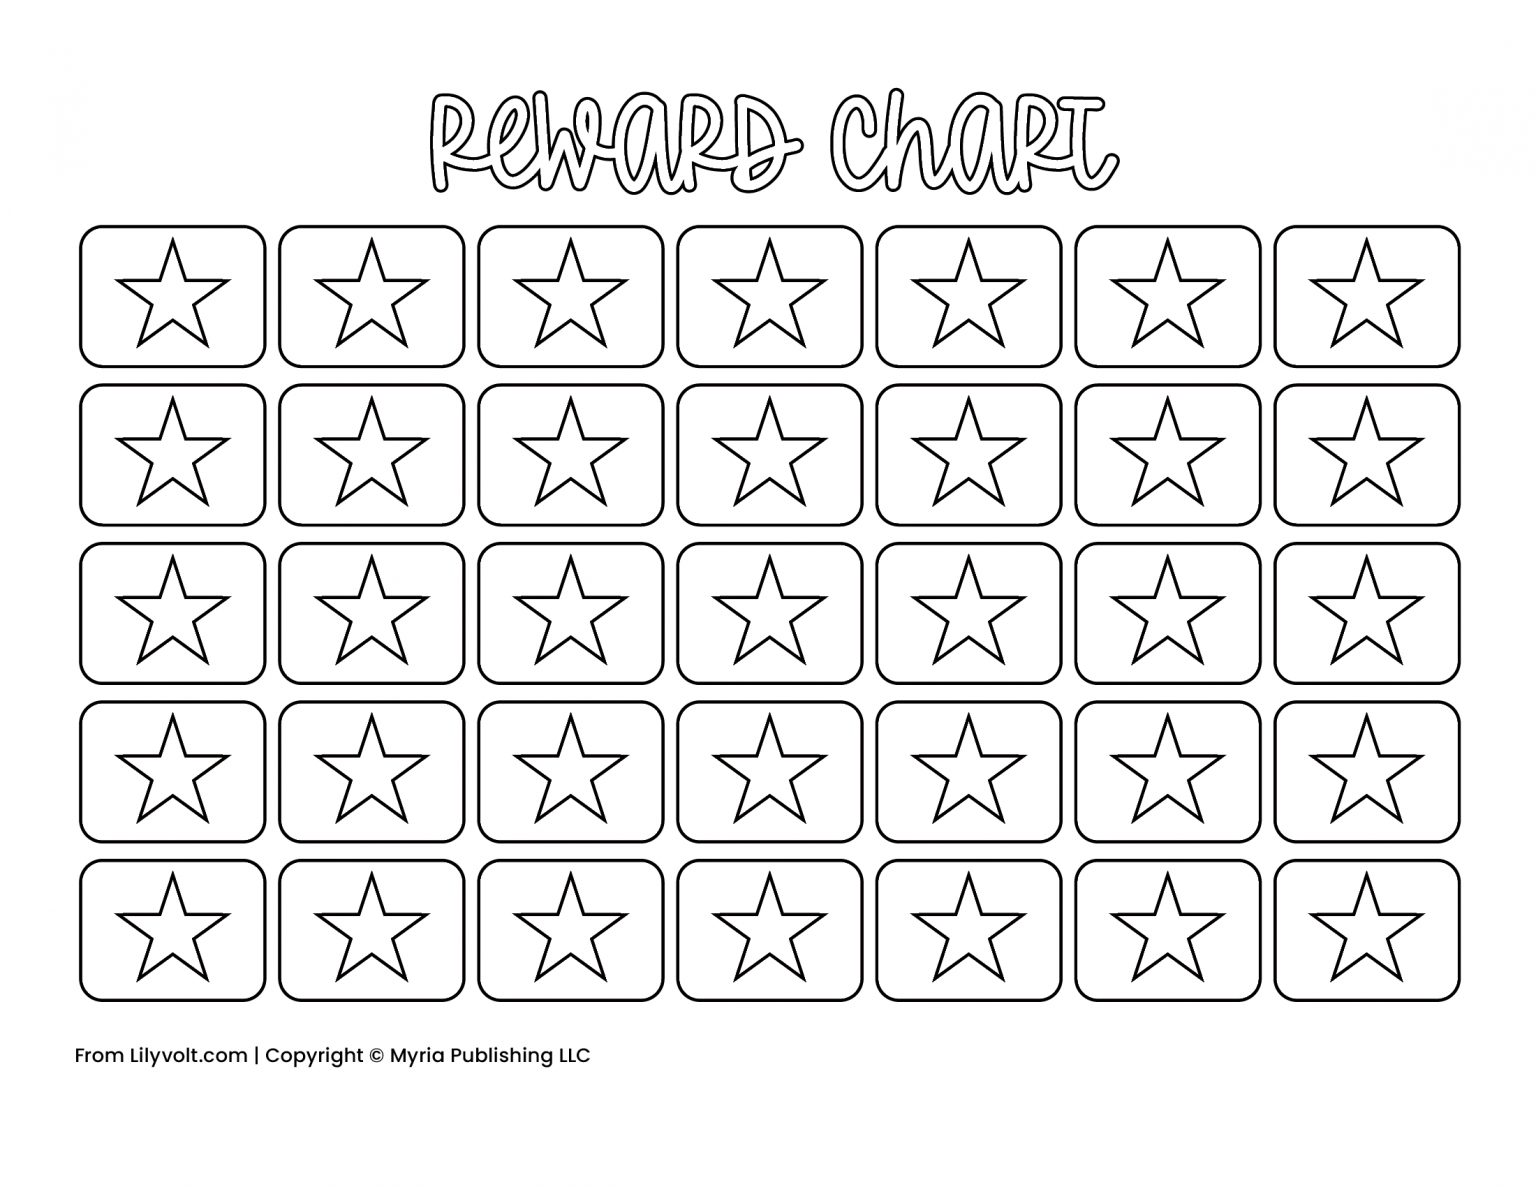 10 free printable reward charts to motivate kids: Fill in the stars